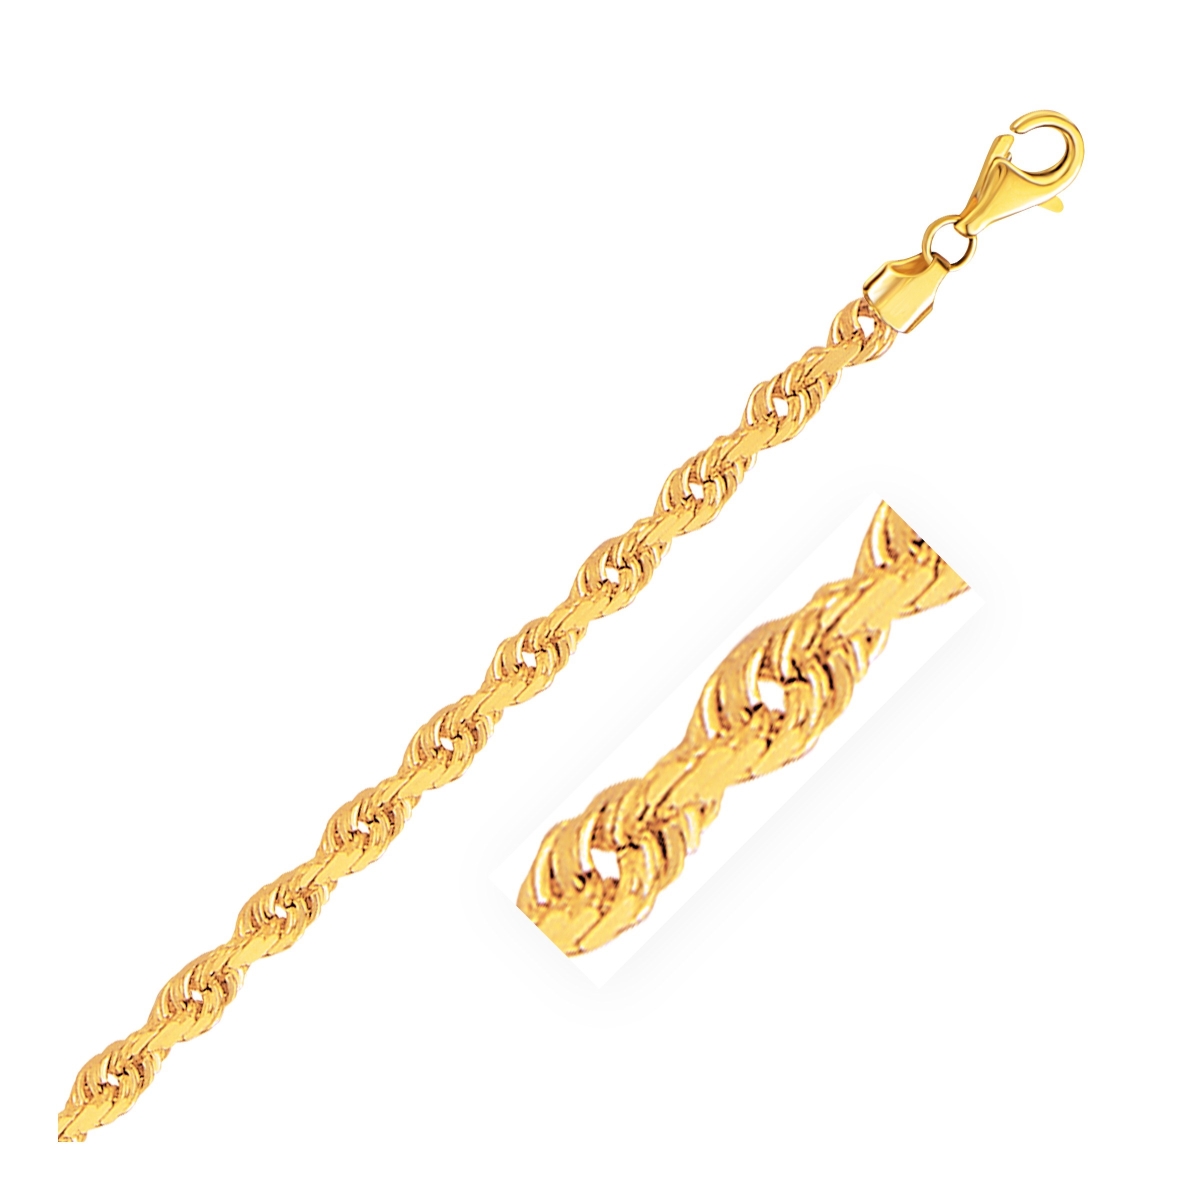 Iconic Jewels D82290762-8 5 mm 10k Yellow Gold Solid Diamond Cut Rope Bracelet - Size 8 in.